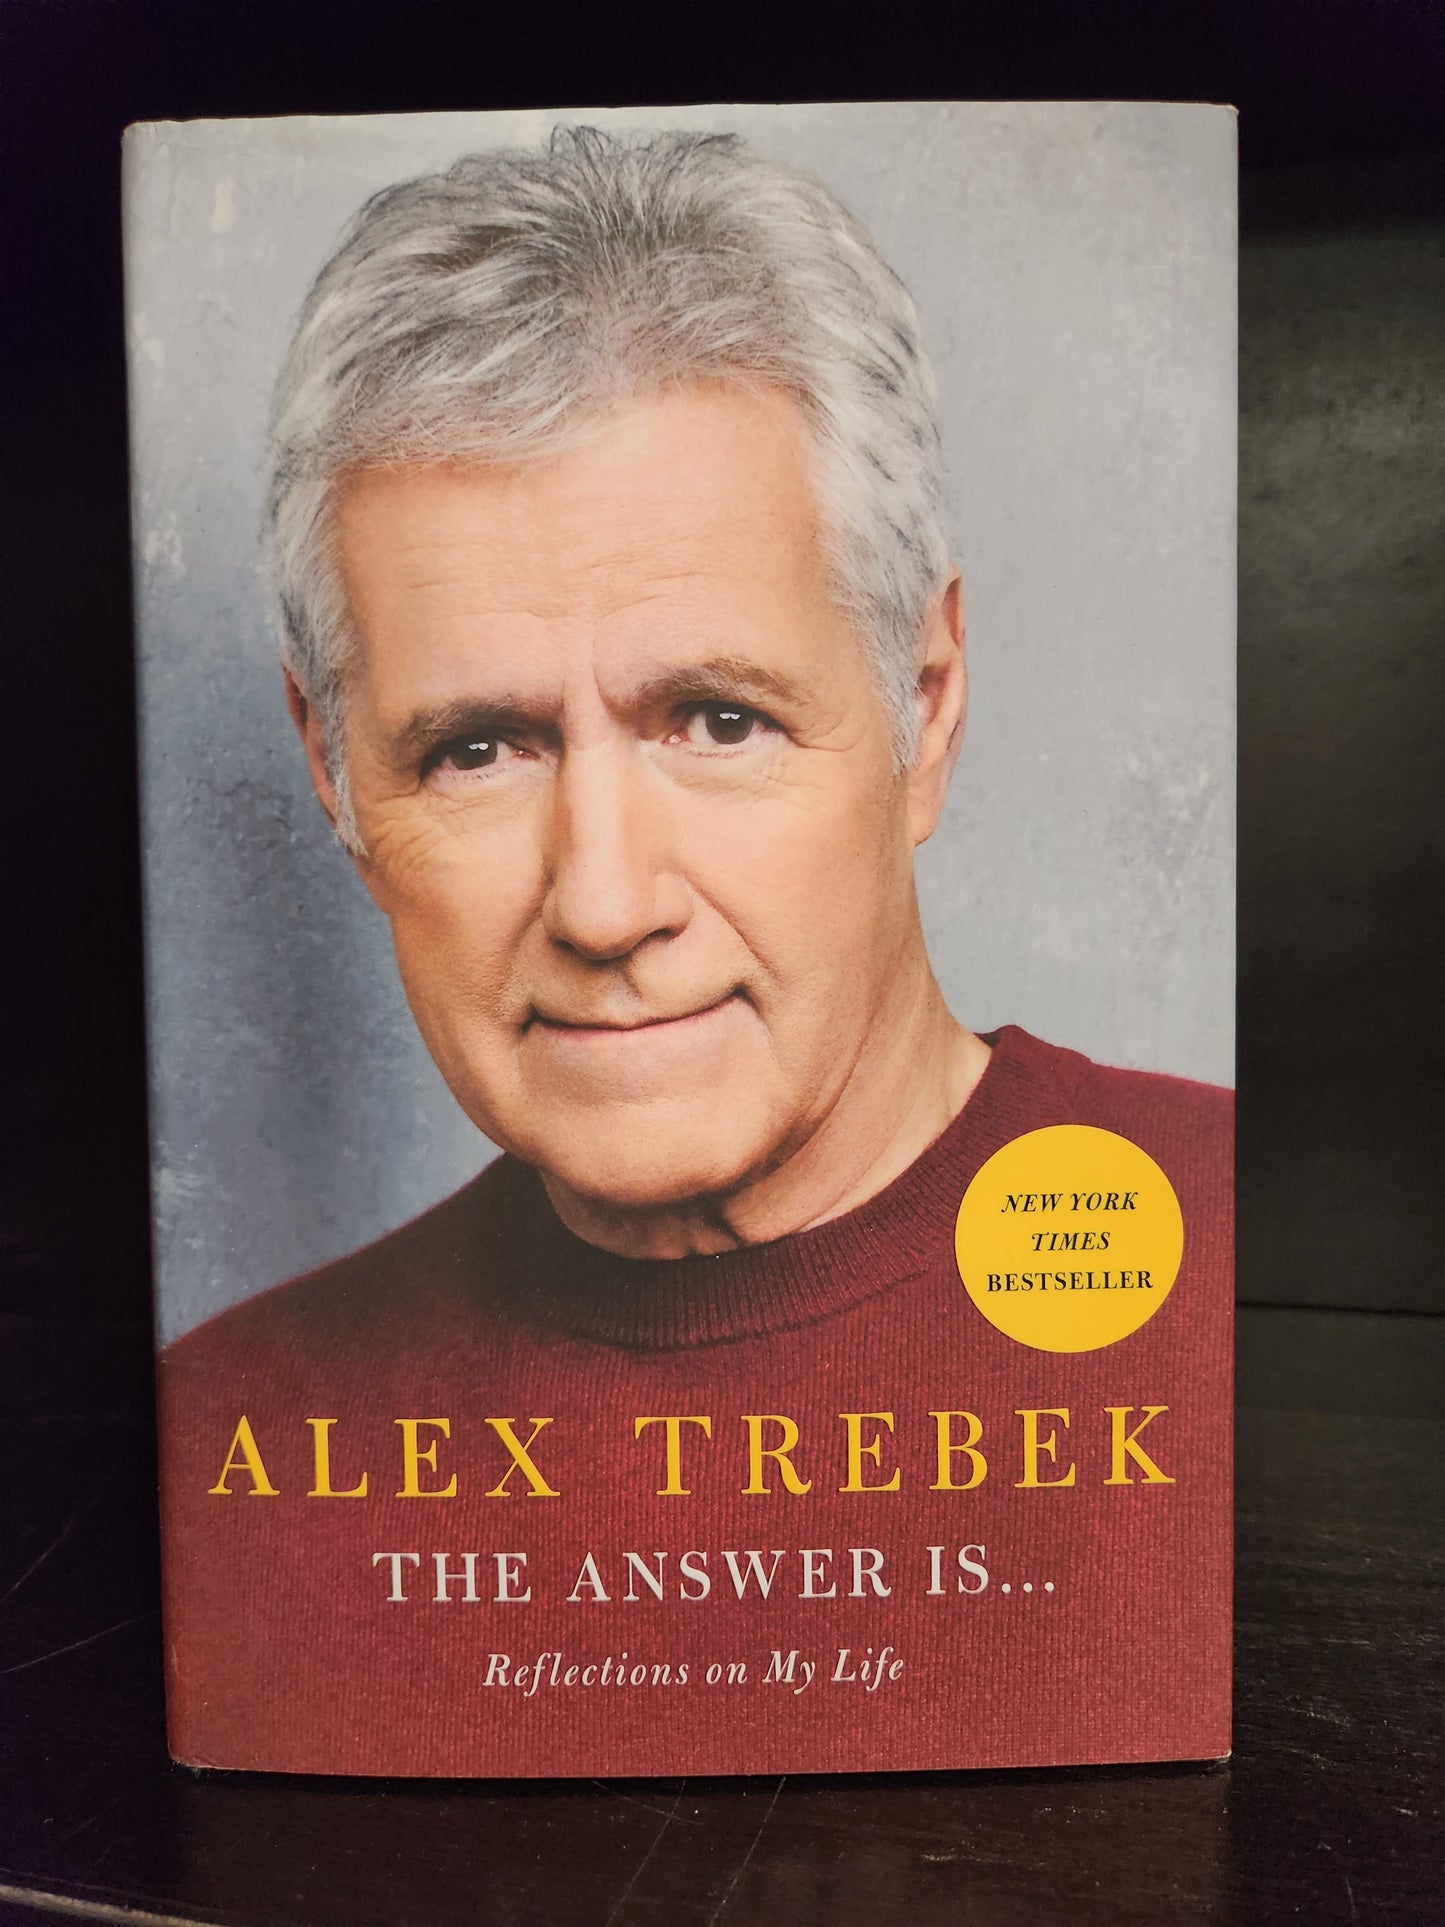 "The Answer Is...: Reflections on My Life" by by Alex Trebek, Ken Jennings, et al.